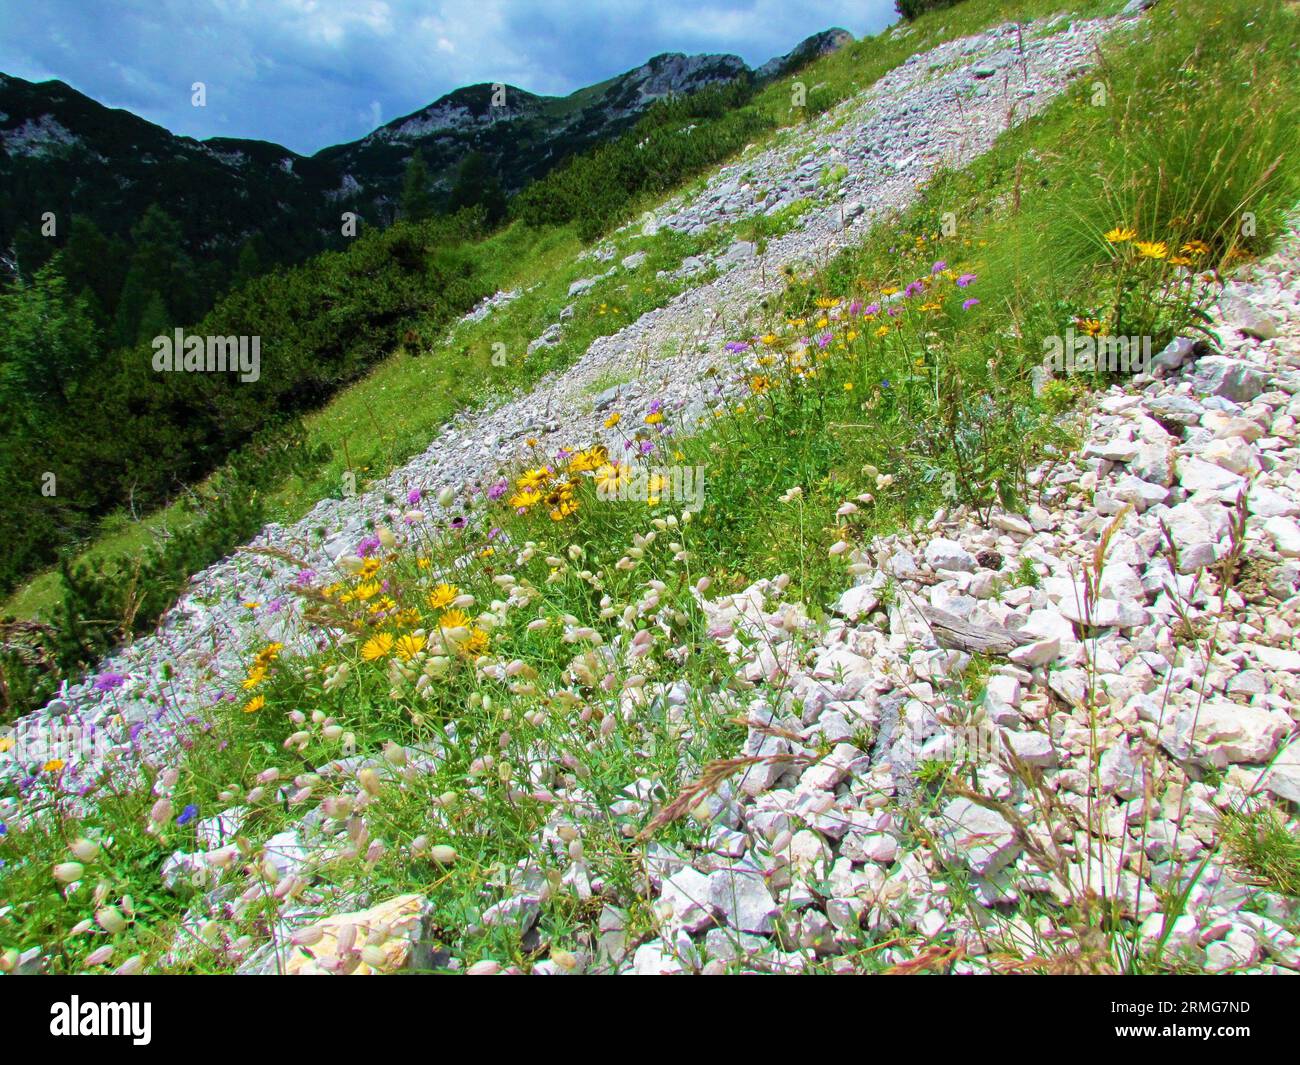 Meadow full of wildflowers incl. hawkbit (Leontodon pyrenaicus) and blue and pink Armeria alpina with an alpine landscape with creeping pine in the ba Stock Photo